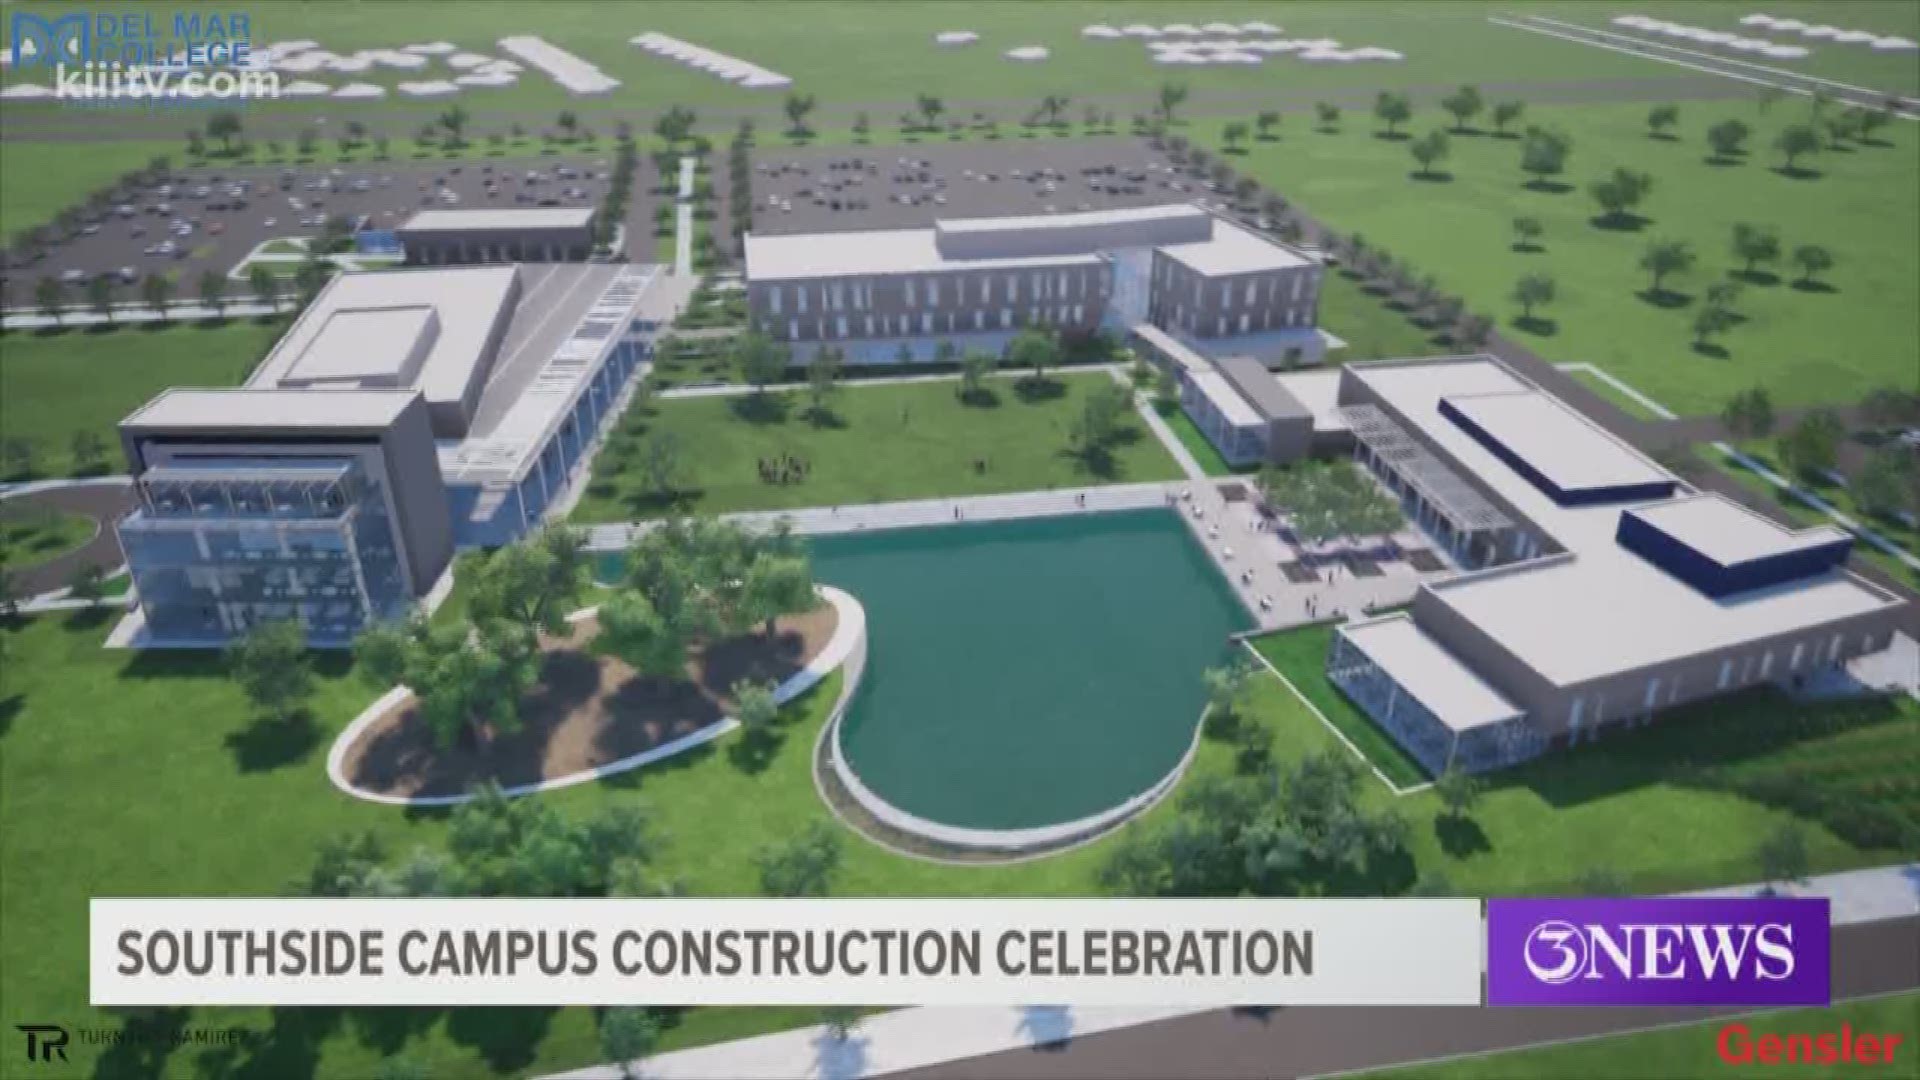 Del Mar College celebrated the beginning of construction of its brand new southside campus Monday.